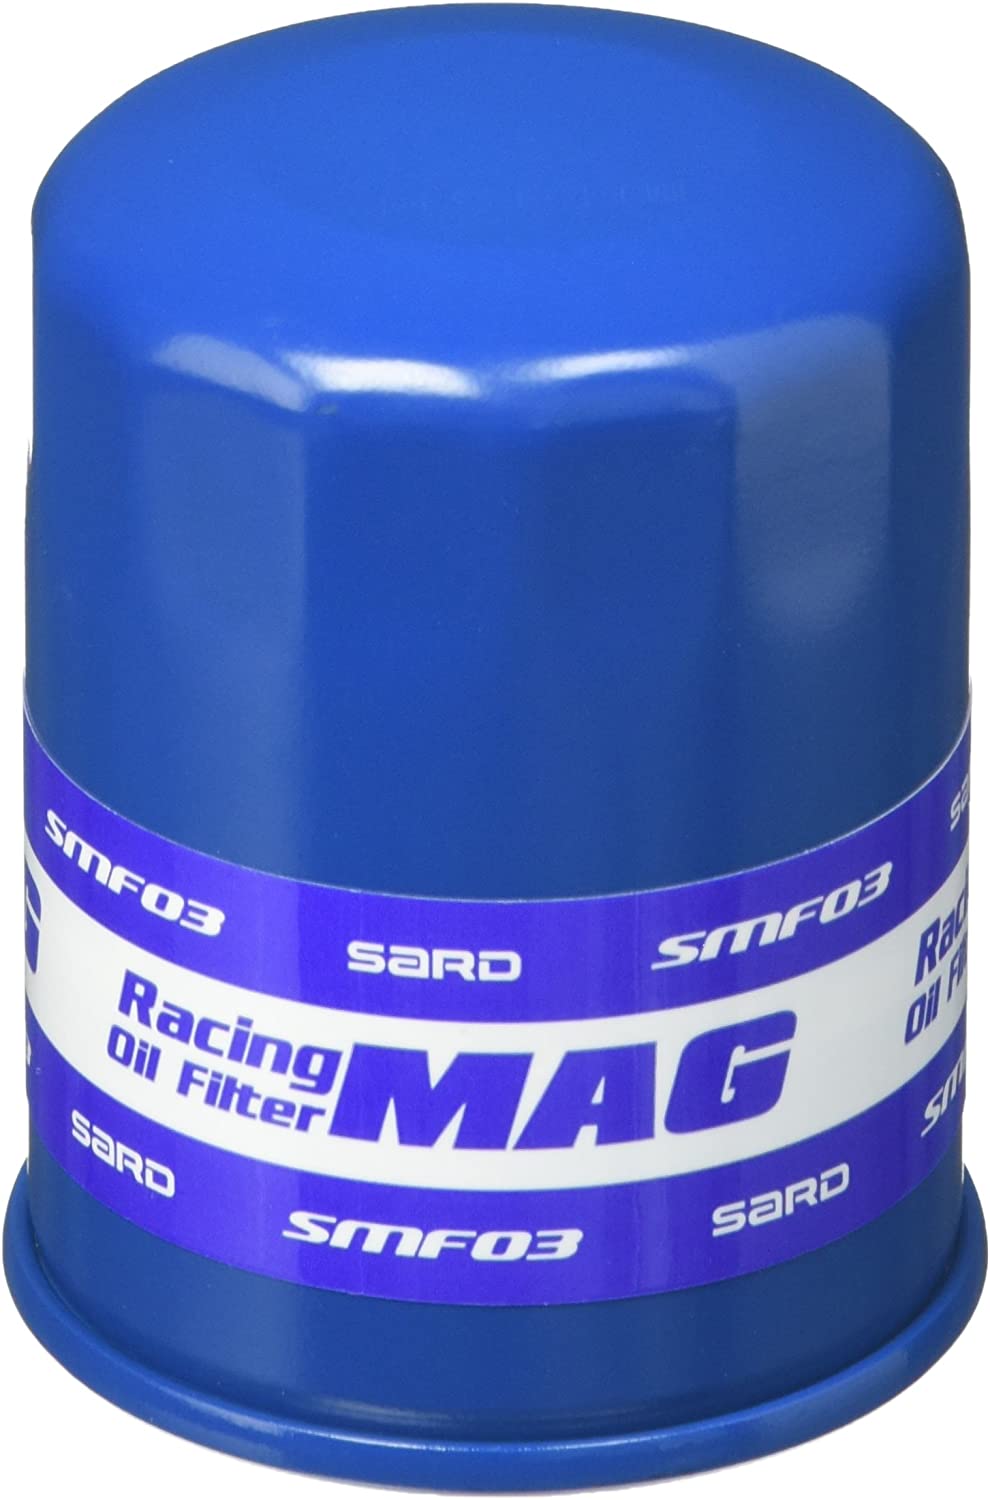 SARD RACING OIL FILTER For DEMIO DY3W DY5W SMF01